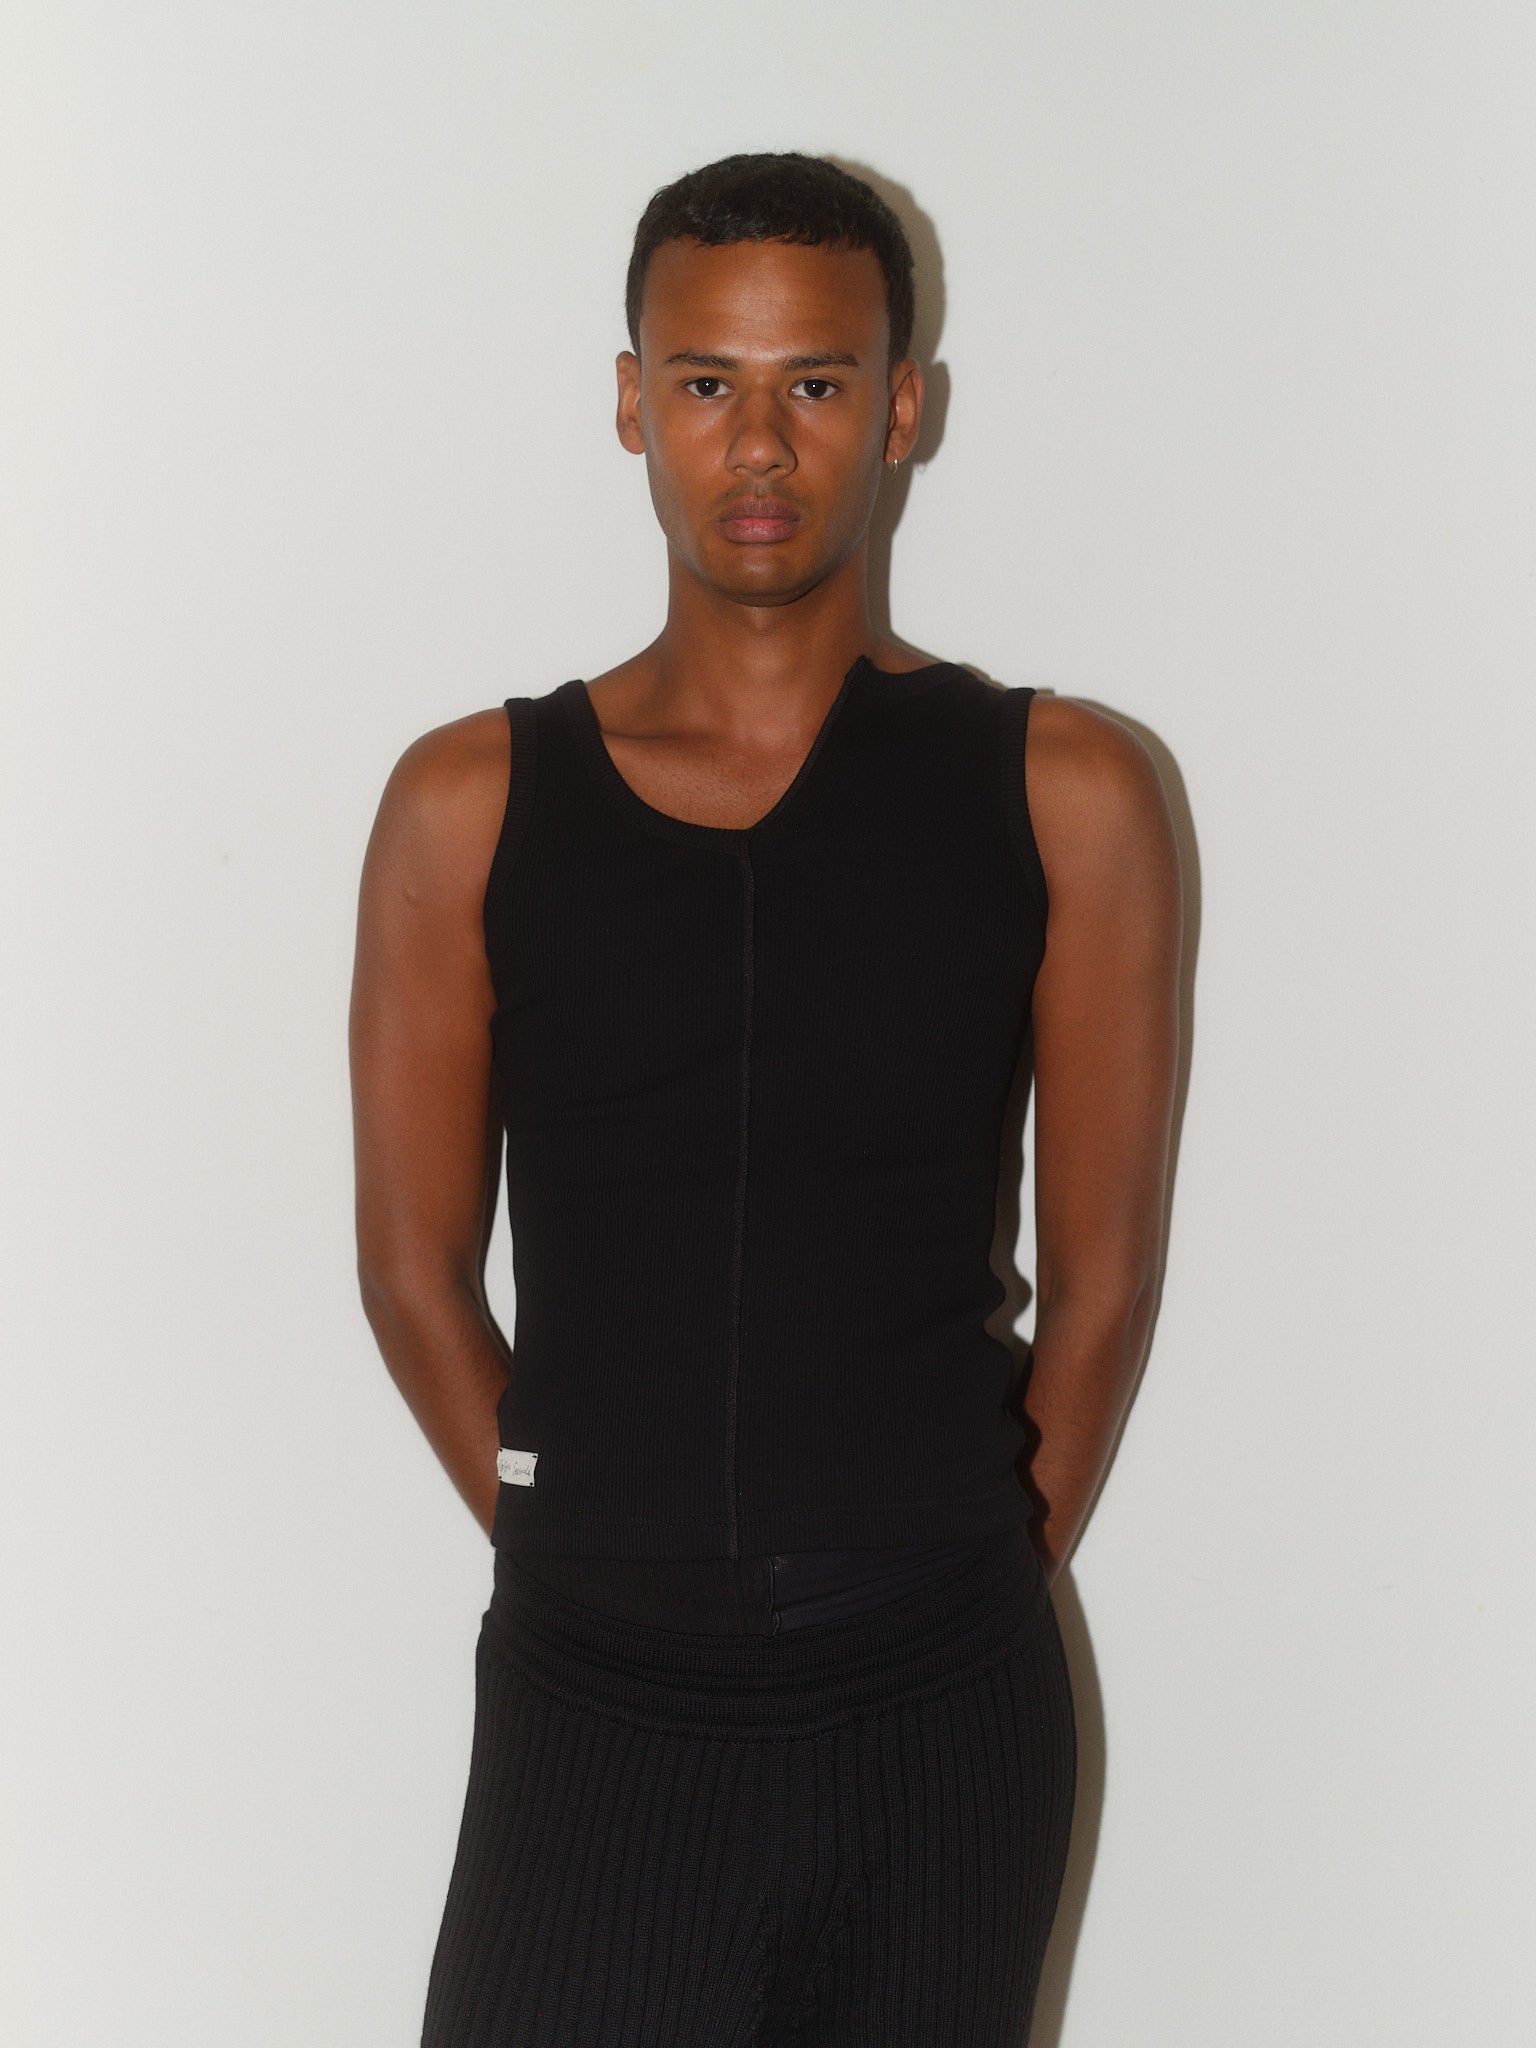 Tank Top designed by Christina Seewald. Sustainable, designed and made in Europe.